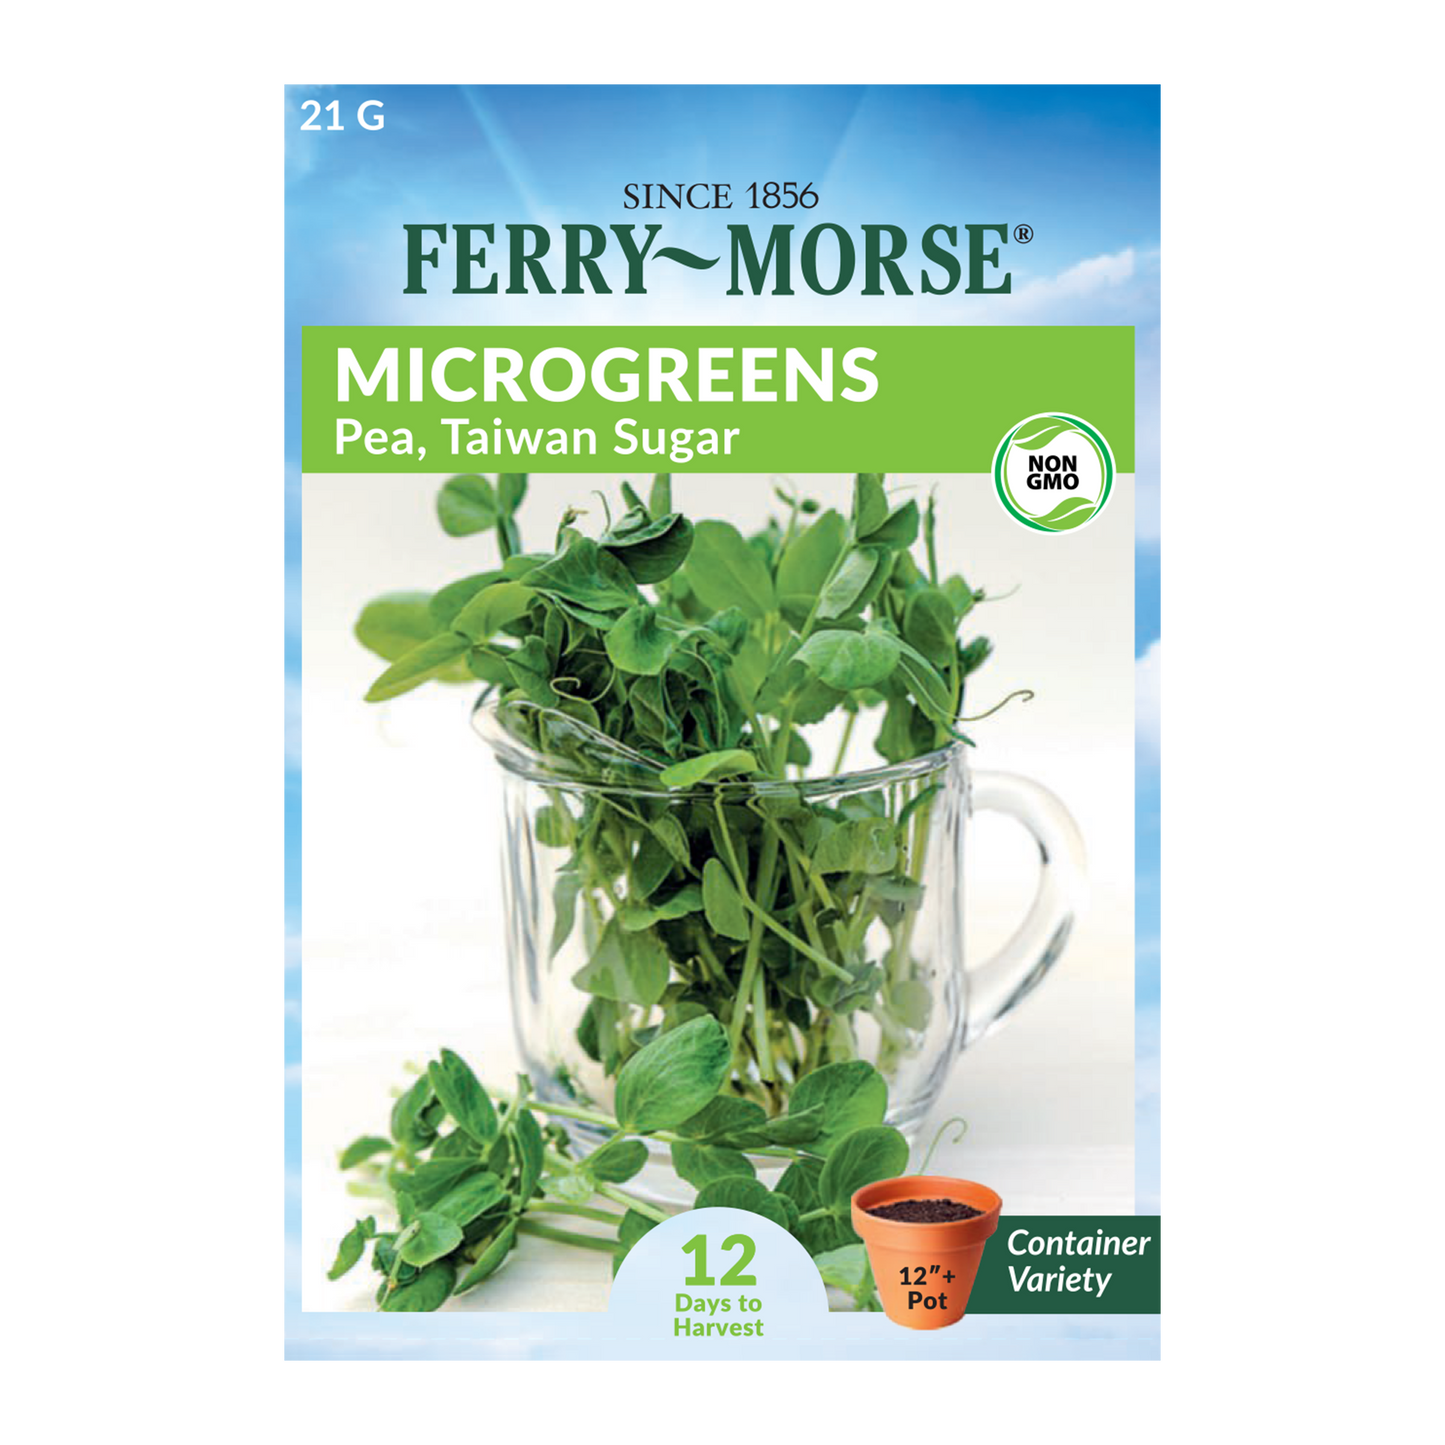 Taiwan Sugar Pea Microgreen Seeds_Front of pea microgreens seeds packet_12 Days to Harvest_Photo shows delicious looking pea microgreens in a clear glass cup.